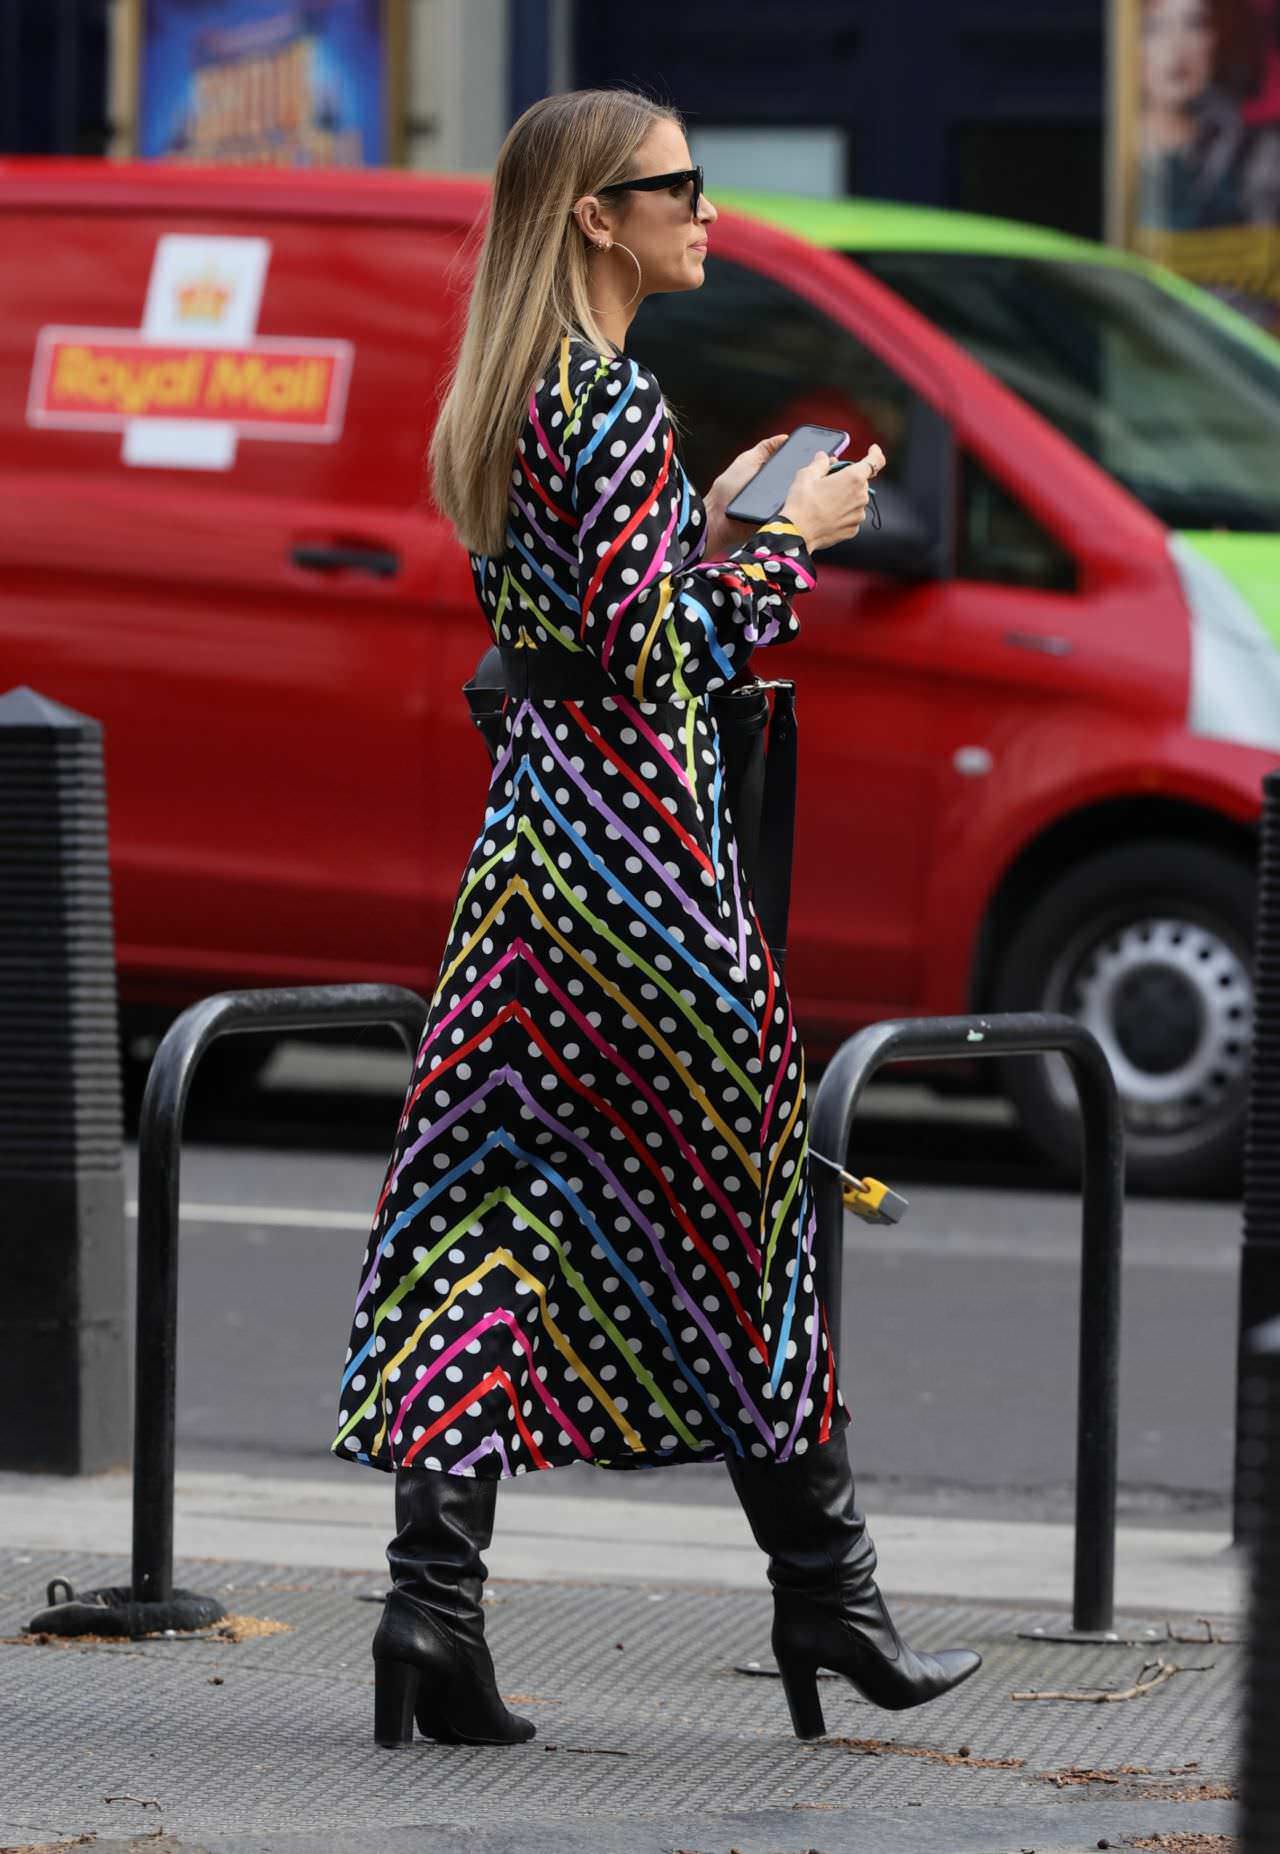 Vogue Williams Goes to Work in a Chic Polka Dot Striped Dress